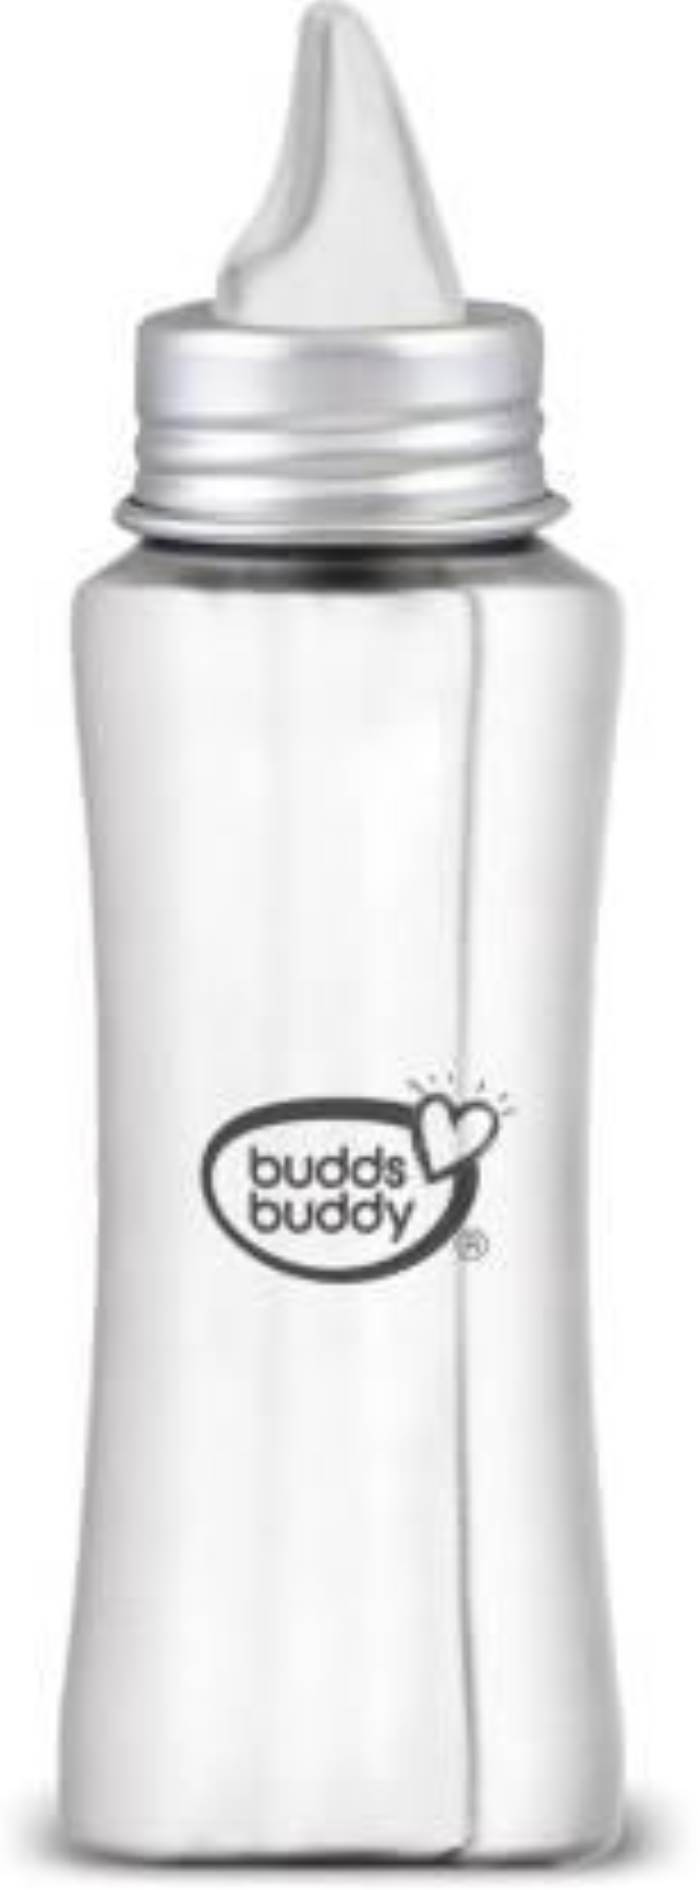 Buddsbuddy Stella Stainless Steel Regular Neck BPA Free Baby Feeding Bottle with Extra Sipper Spout - (Grey)